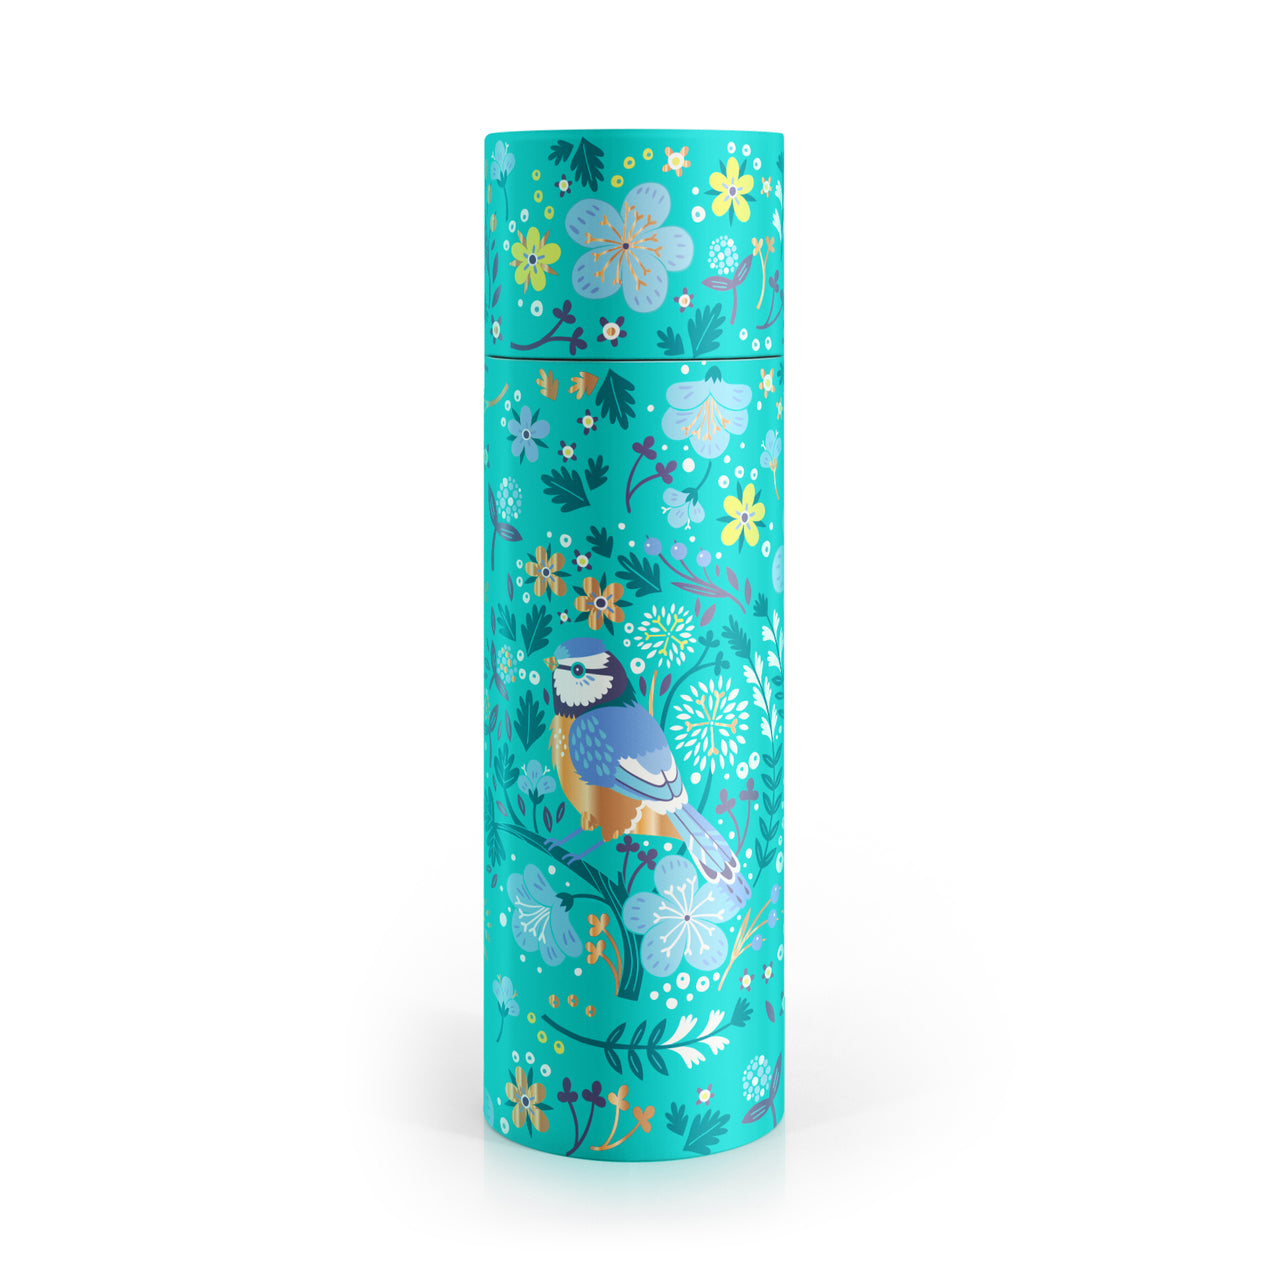 Tipperary Crystal Birdy Metal Water Bottle - Blue Tit